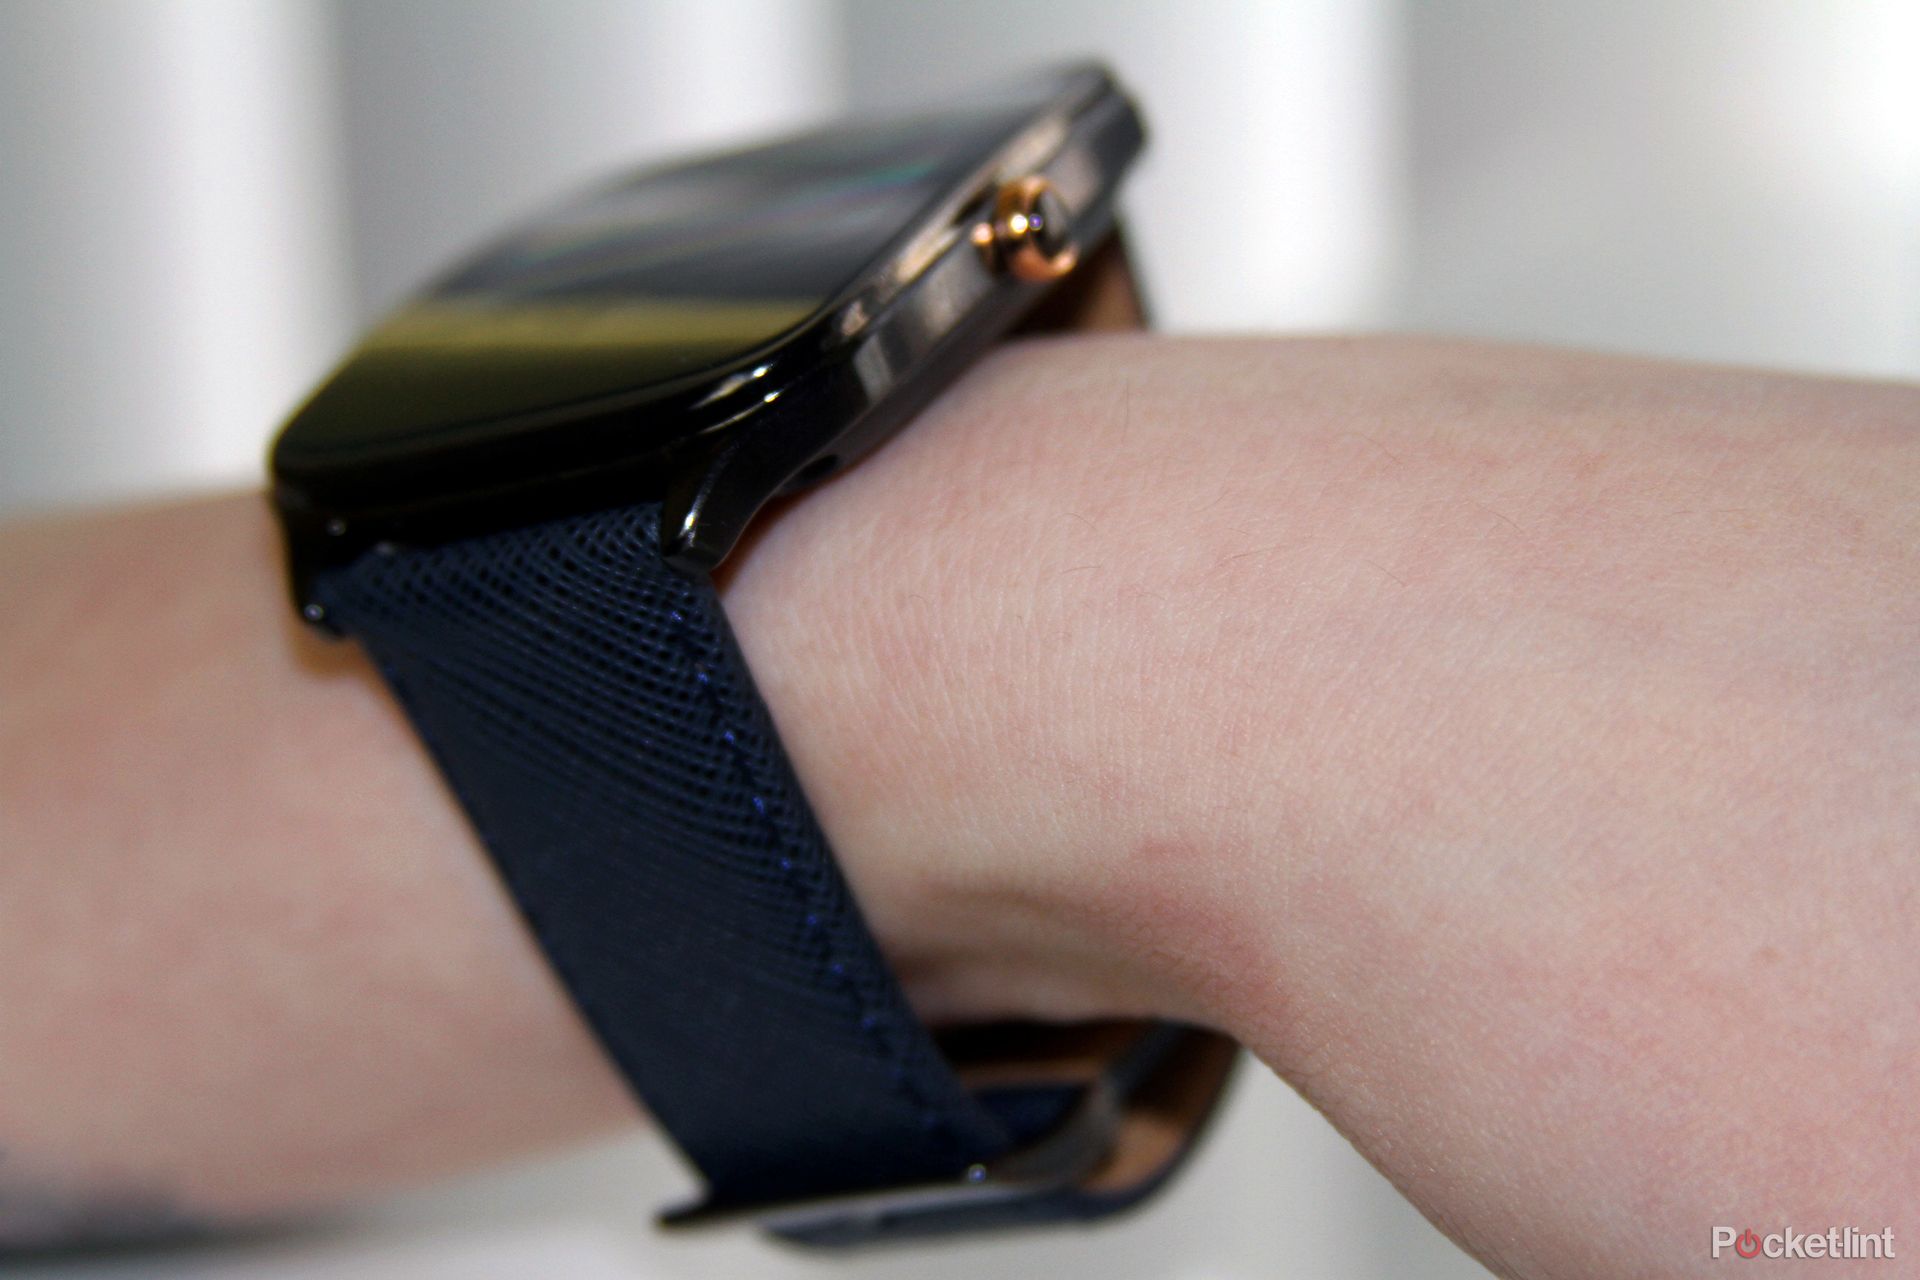 asus zenwatch 2 review image 6